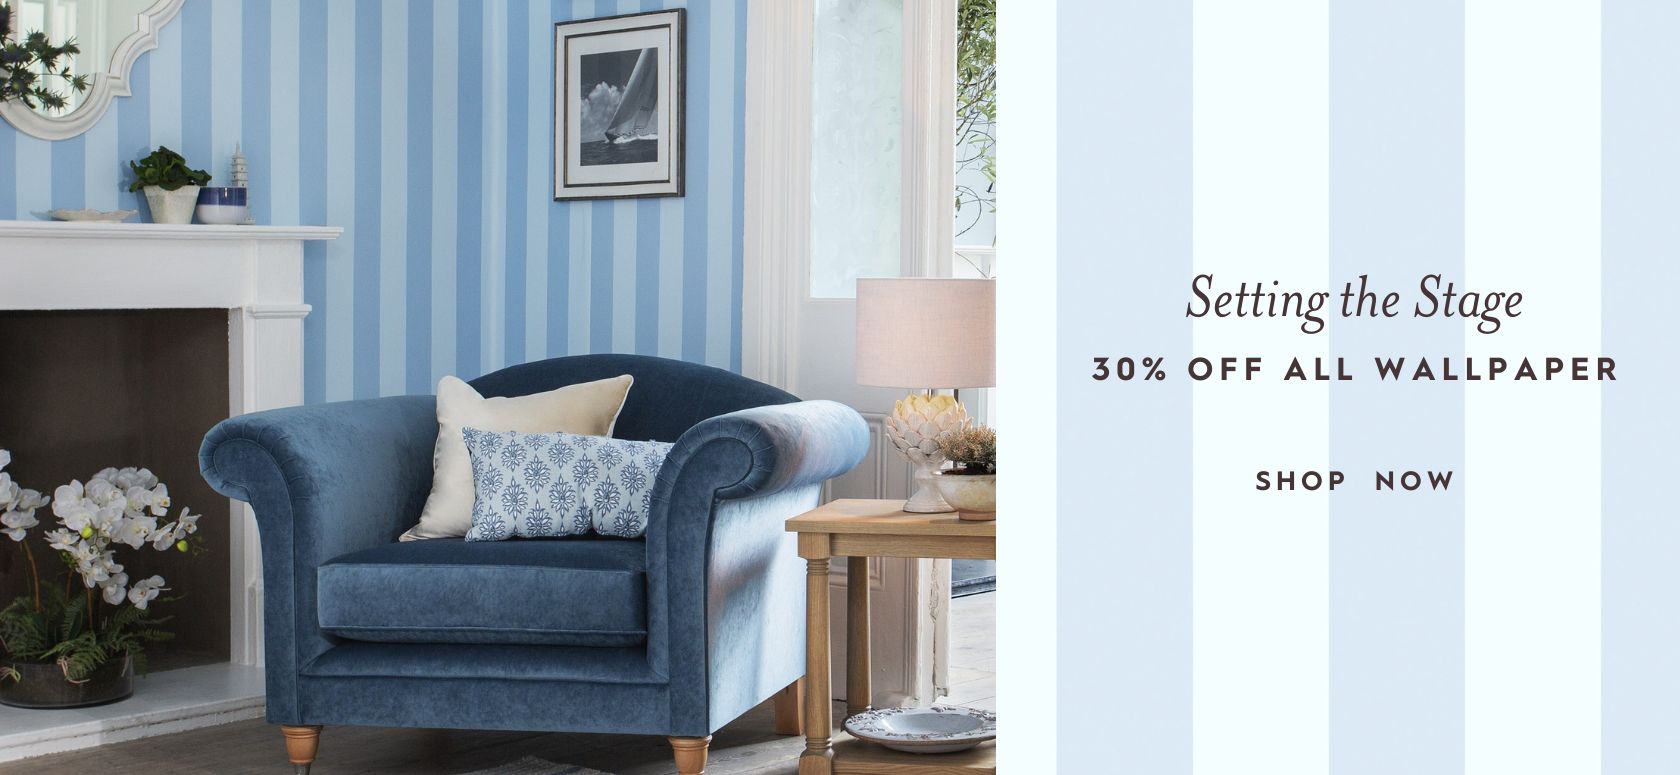 Setting the Stage. 30% Off All Wallpaper